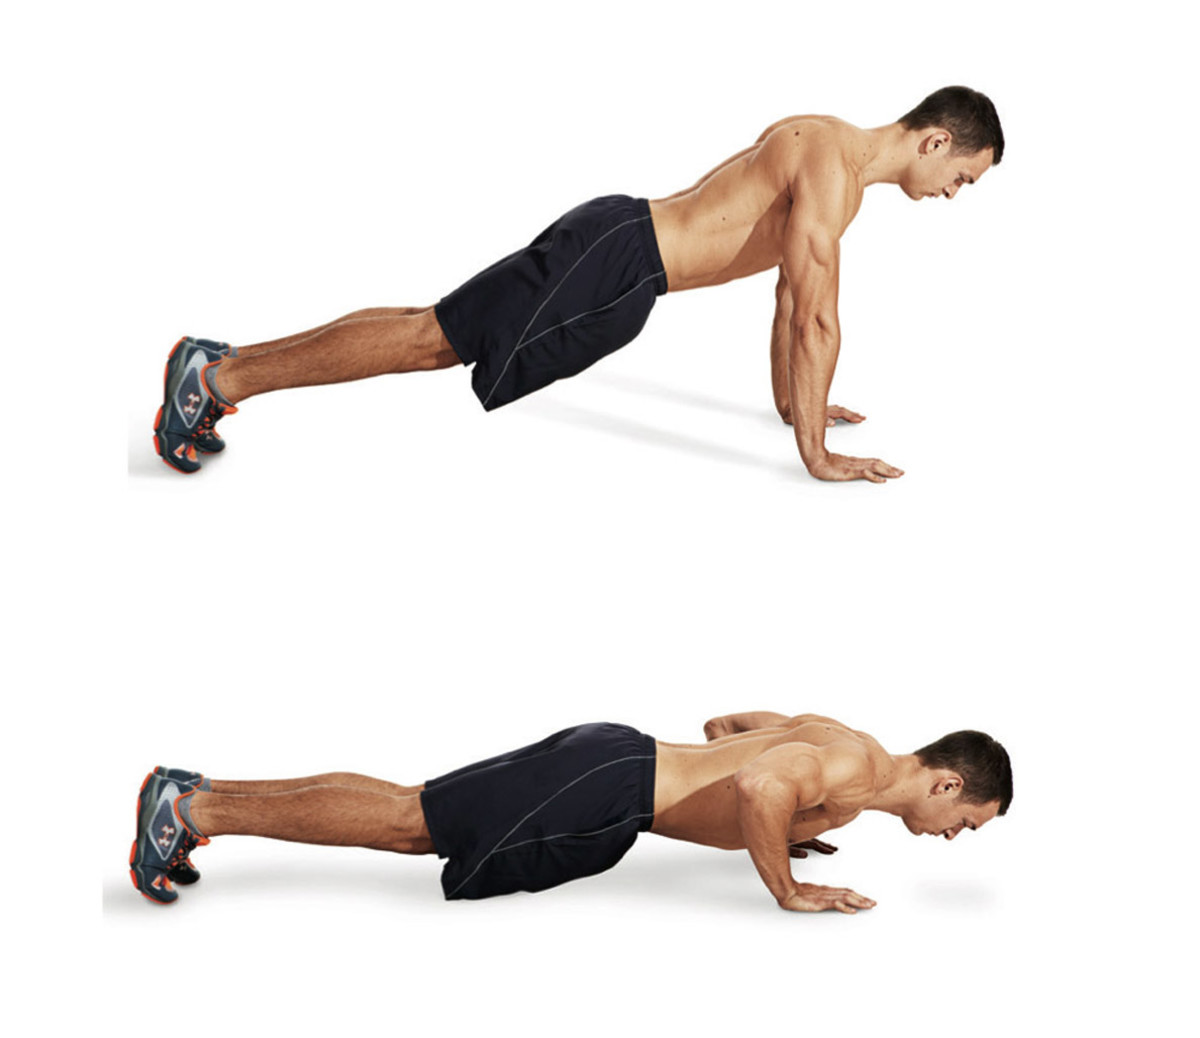 21 Best Bodyweight Exercises to Burn Fat and Build Muscle - Men's